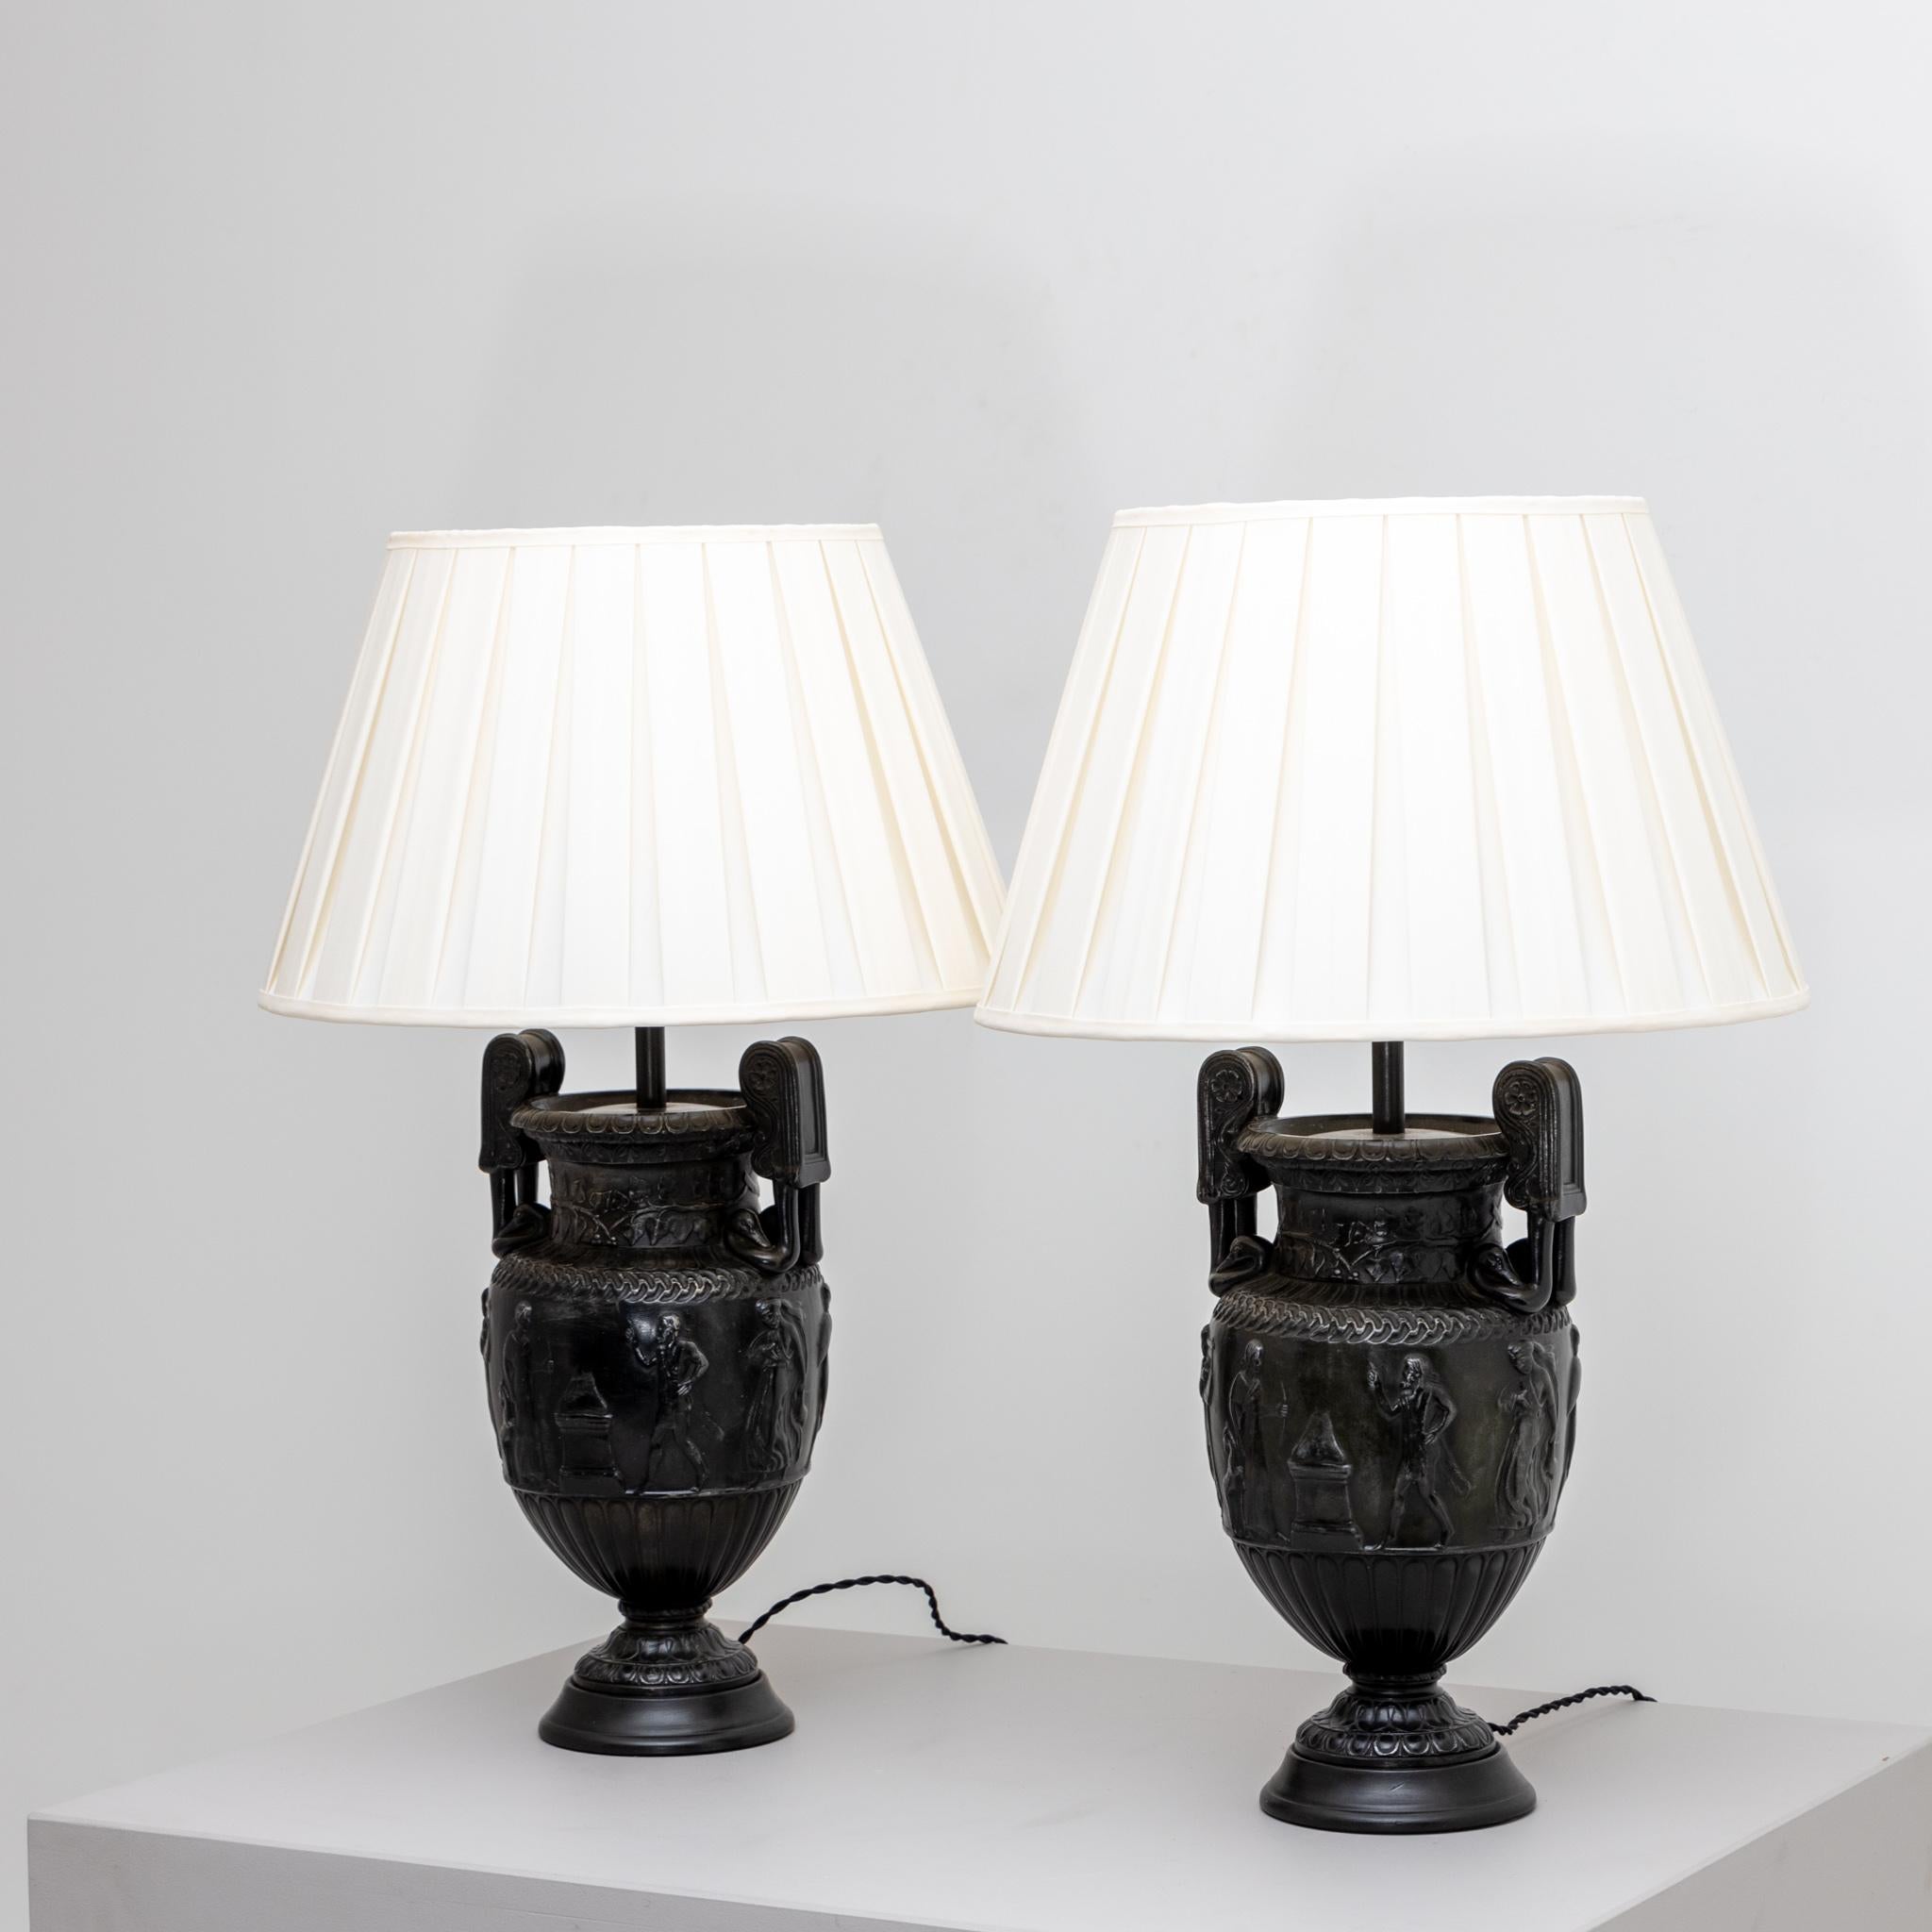 French Table Lamps with Townley Vases, France 19th Century